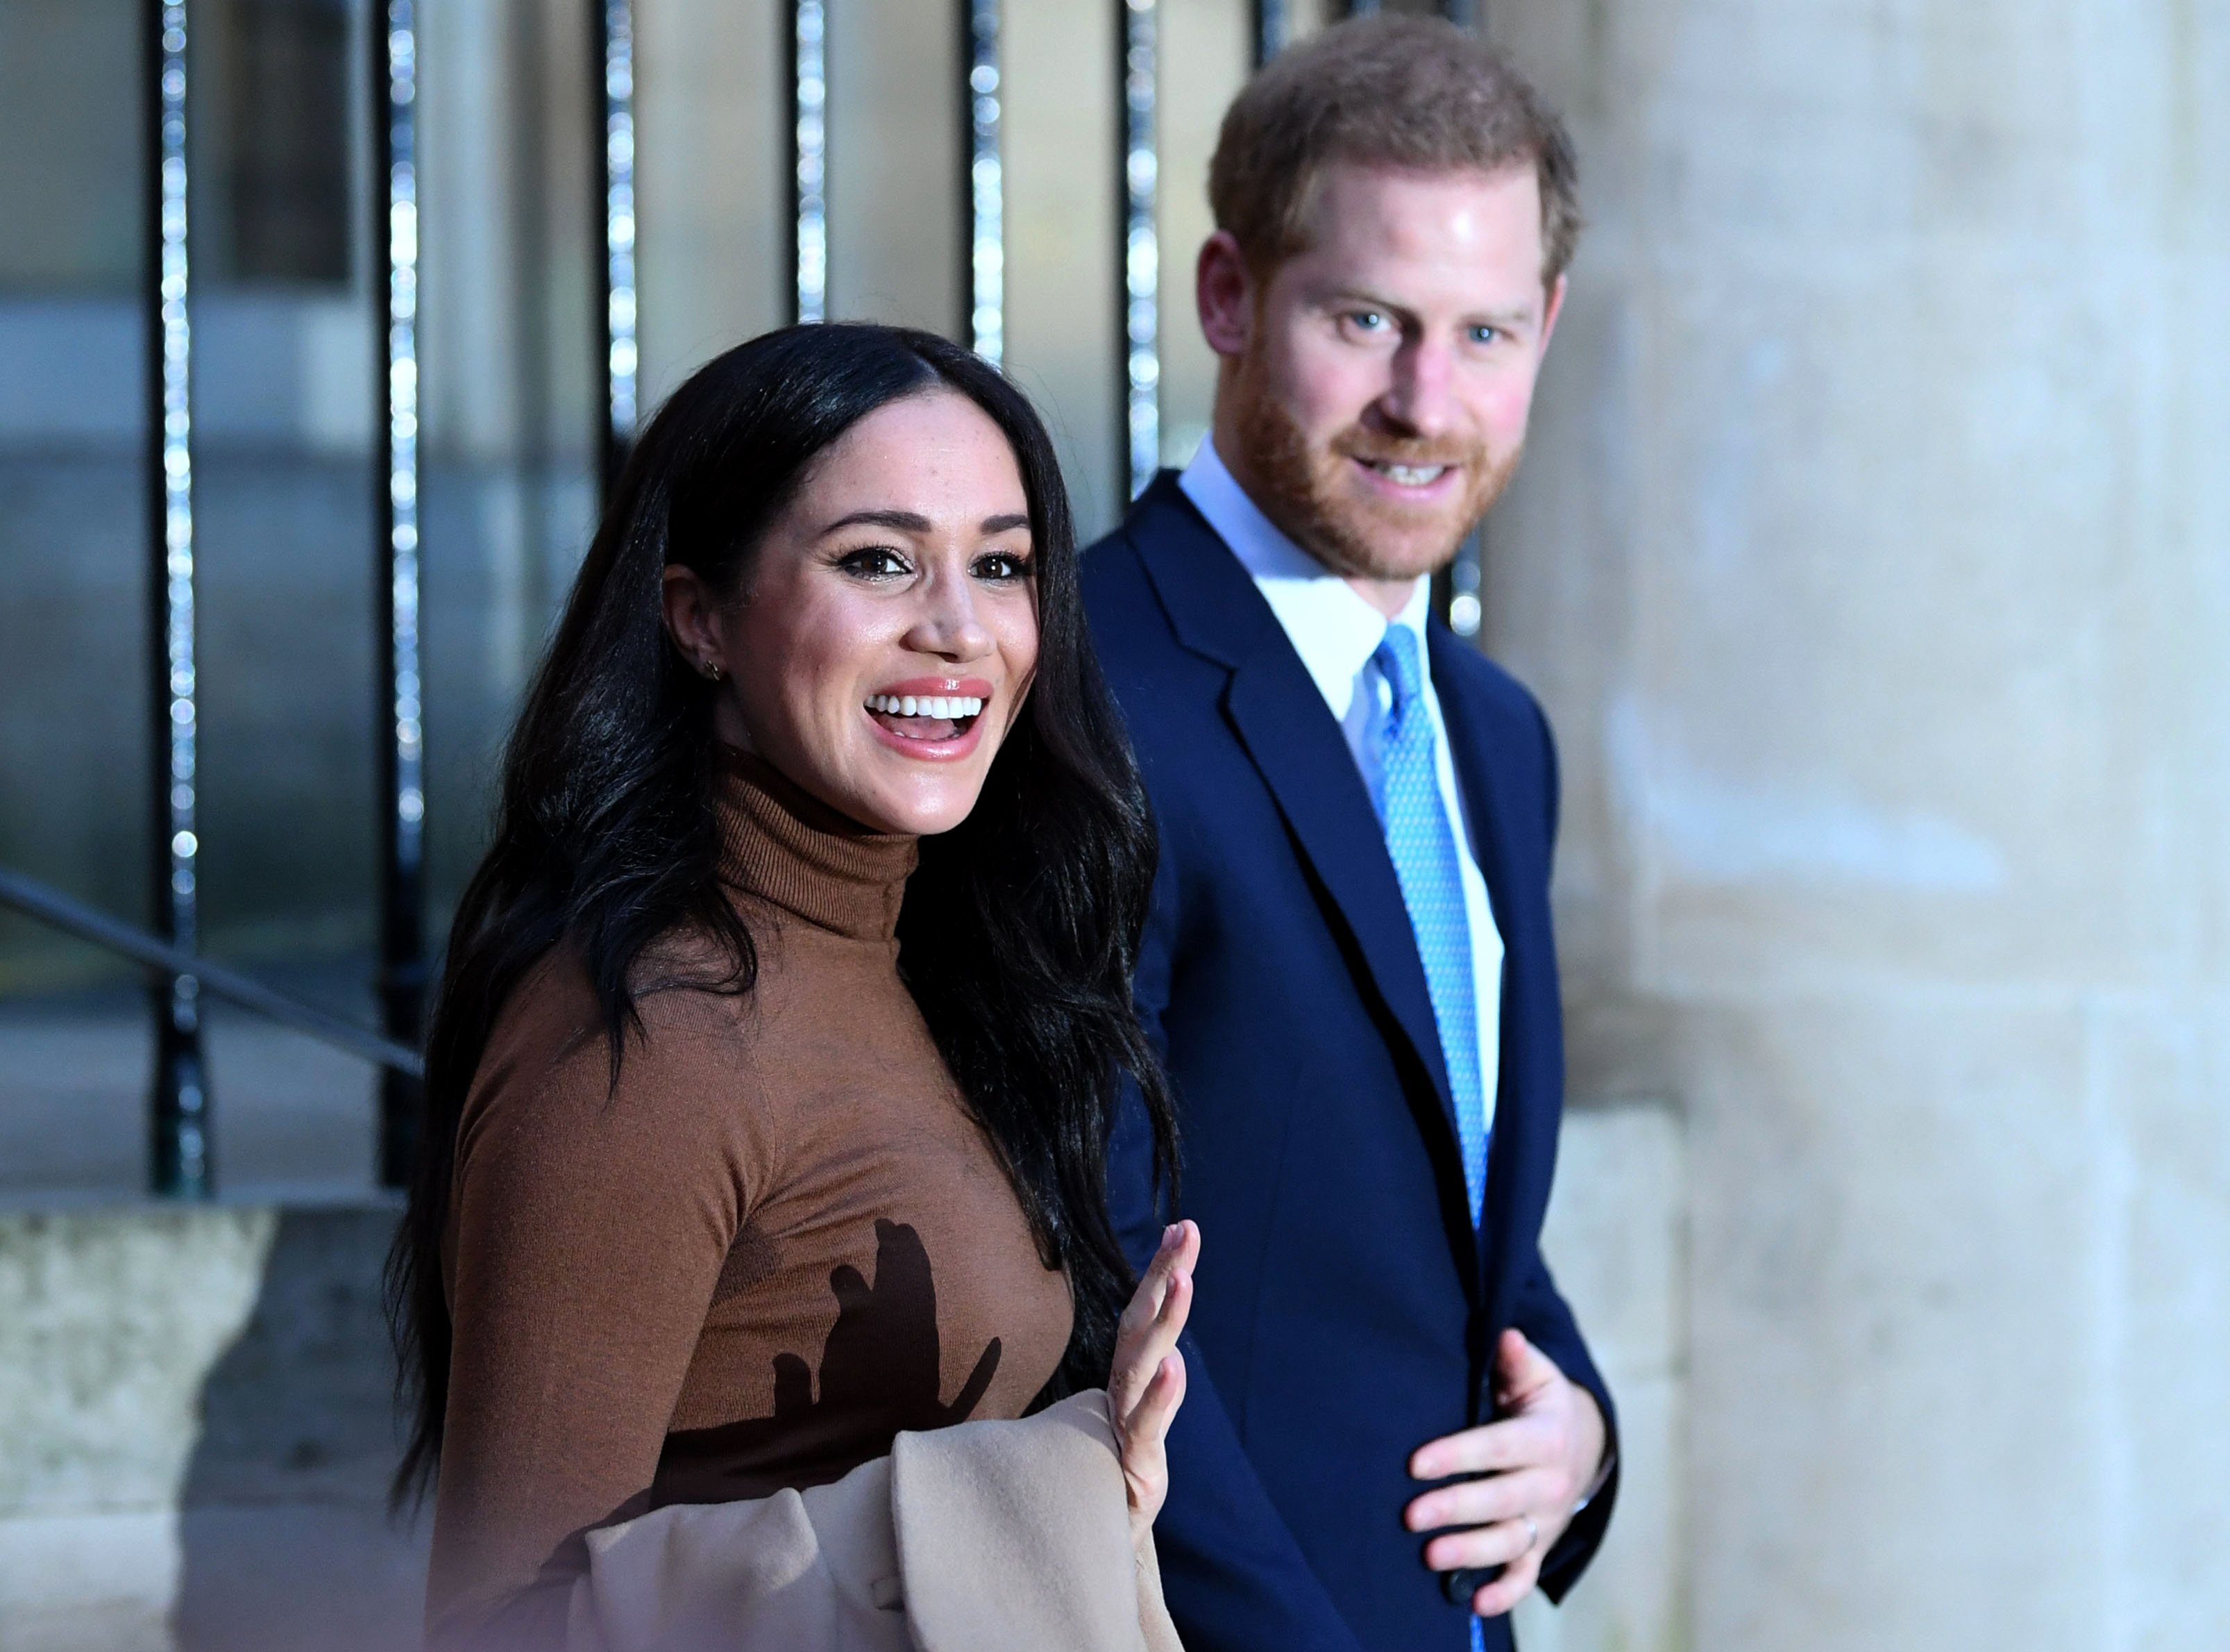 Prince Harry and Meghan Markle after their visit to Canada House, on January 7, 2020, in London, England. | Source: Getty Images.